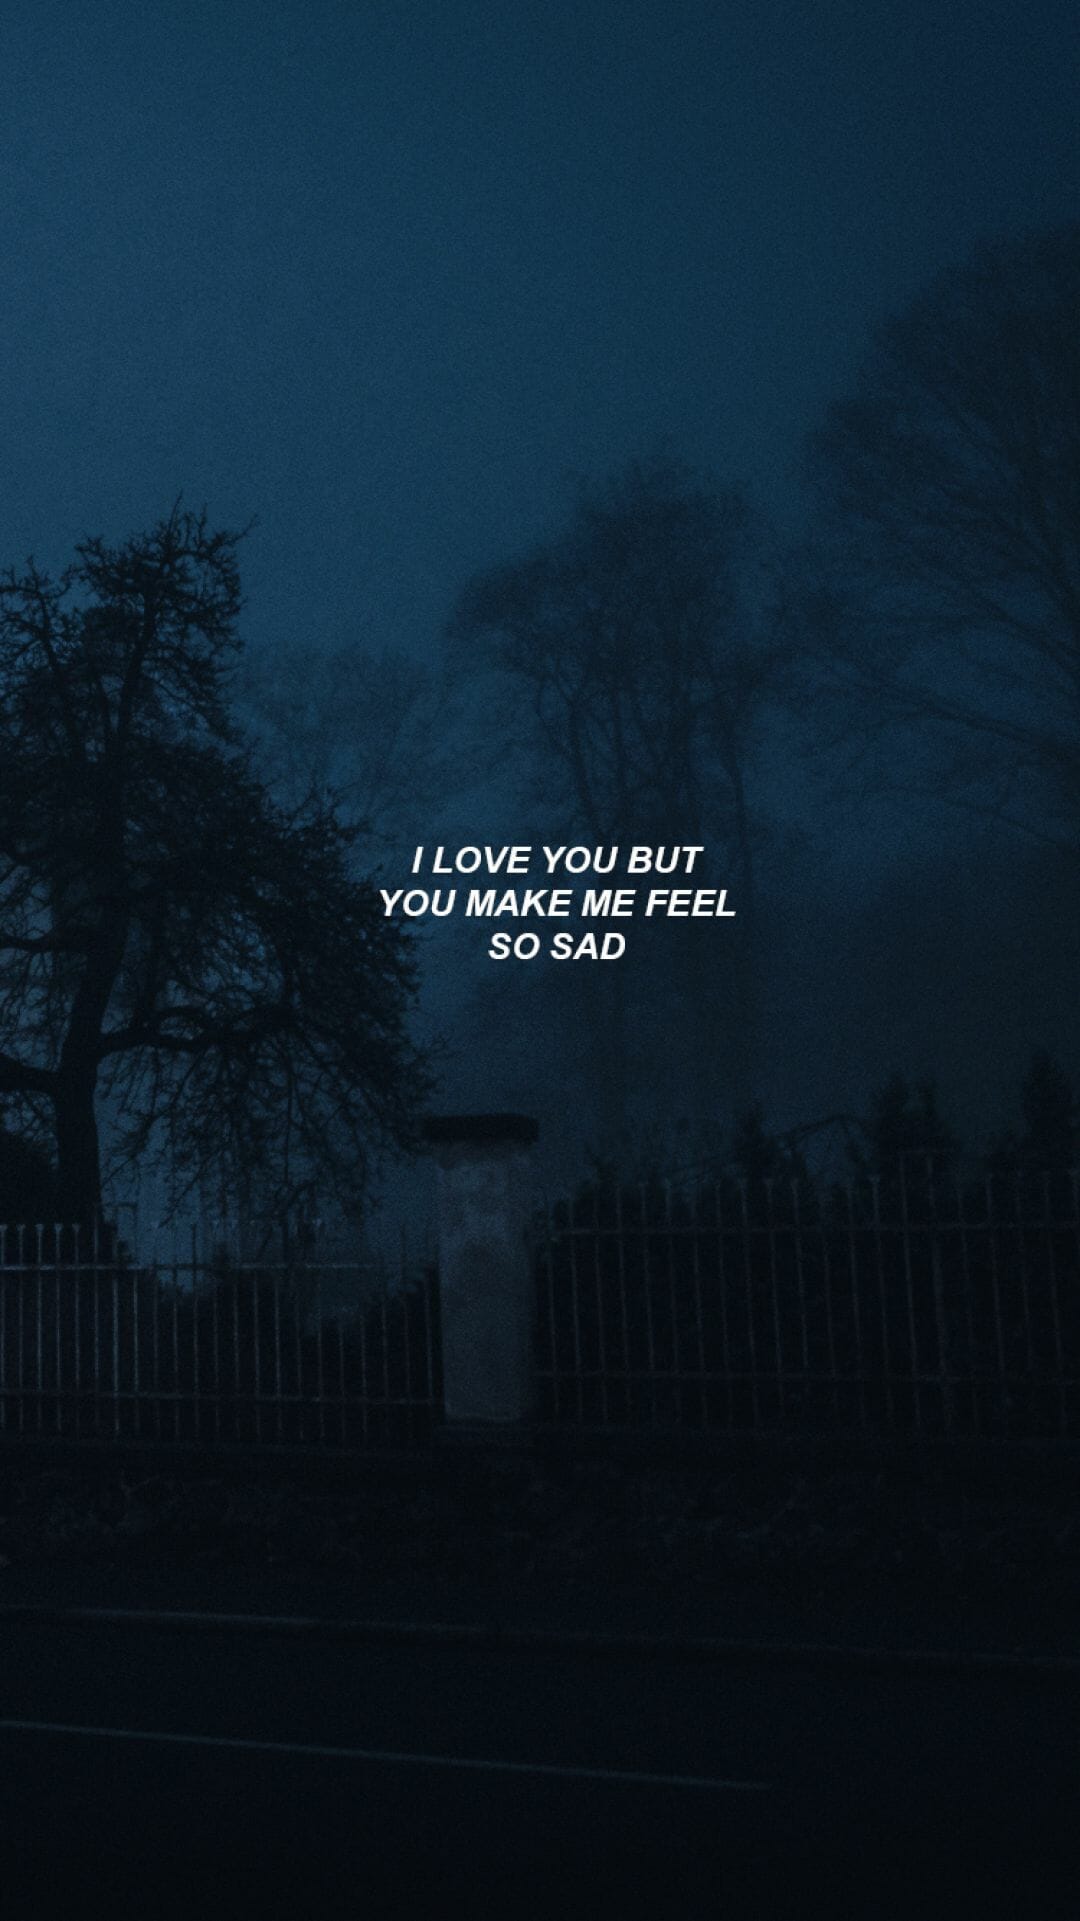 Iphone wallpaper aesthetic dark quotes, i love you but you make me feel so sad - Dark blue